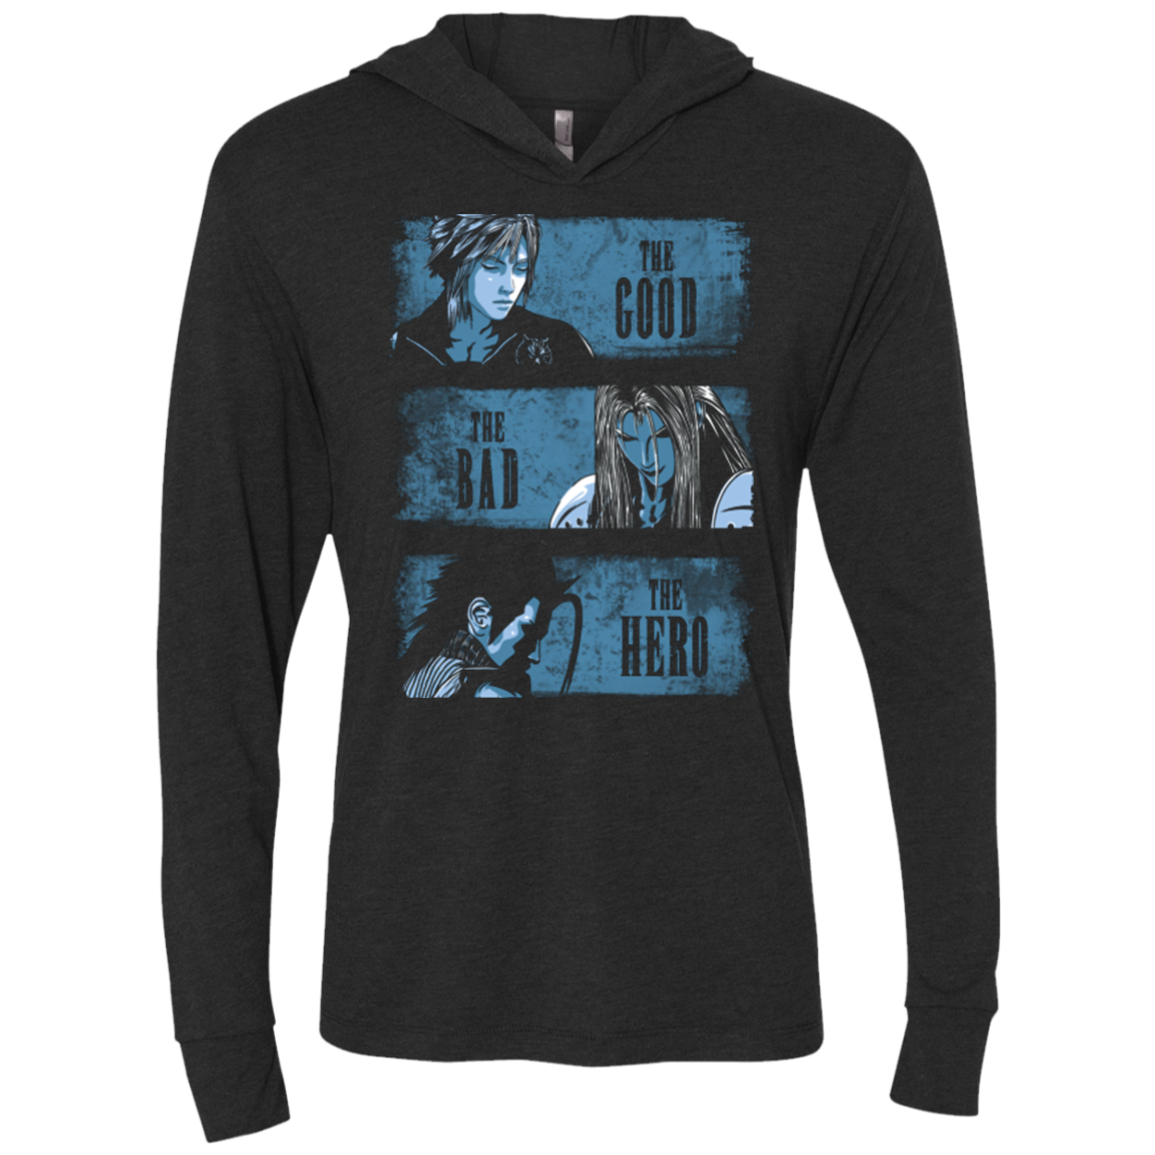 The Good the Bad and the Hero Triblend Long Sleeve Hoodie Tee